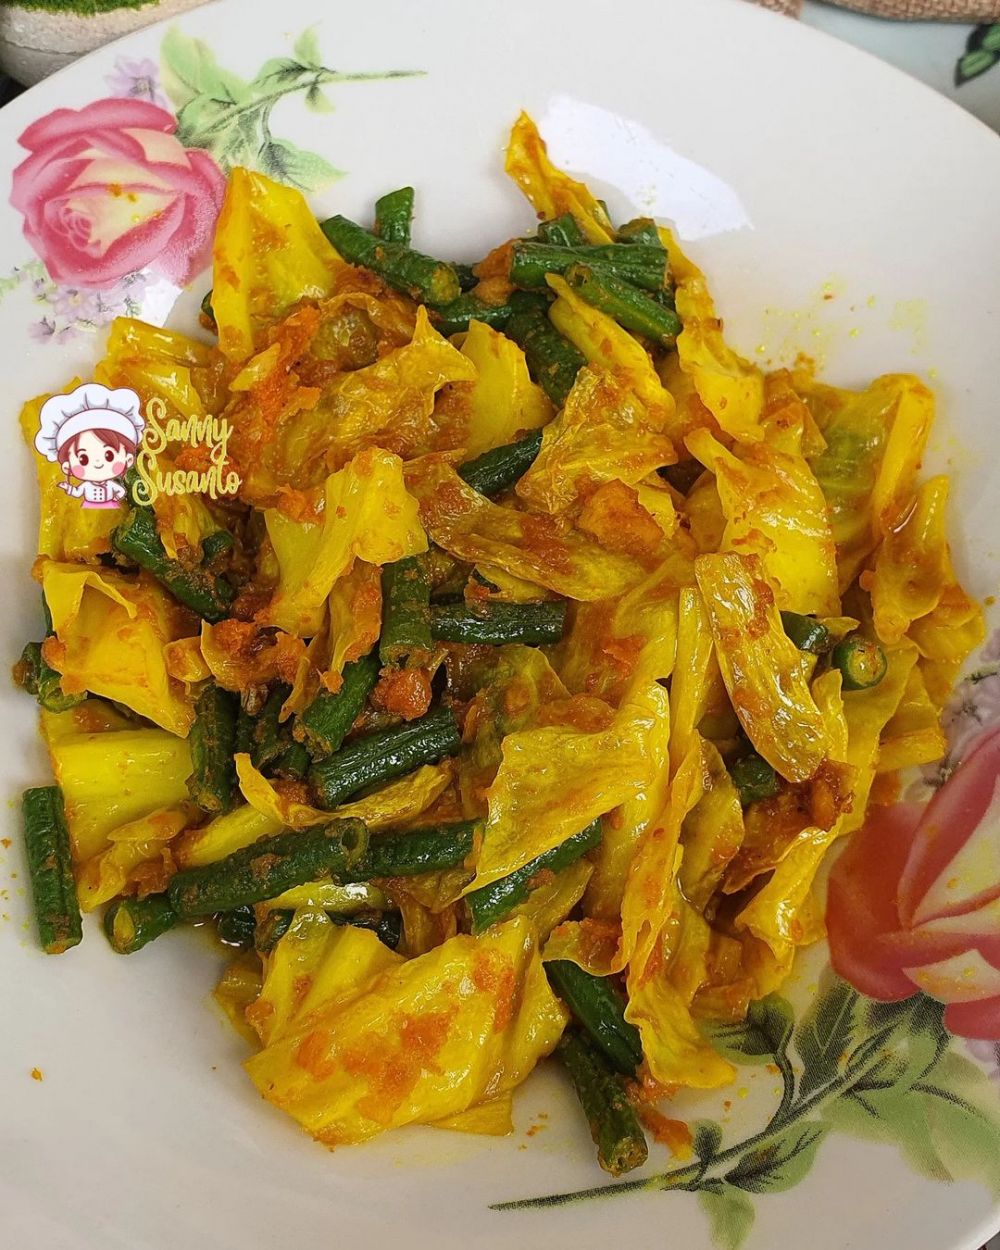 Recipe for stir-fried long beans mixed with yellow spiced cauliflower, delicious, simple and easy to make